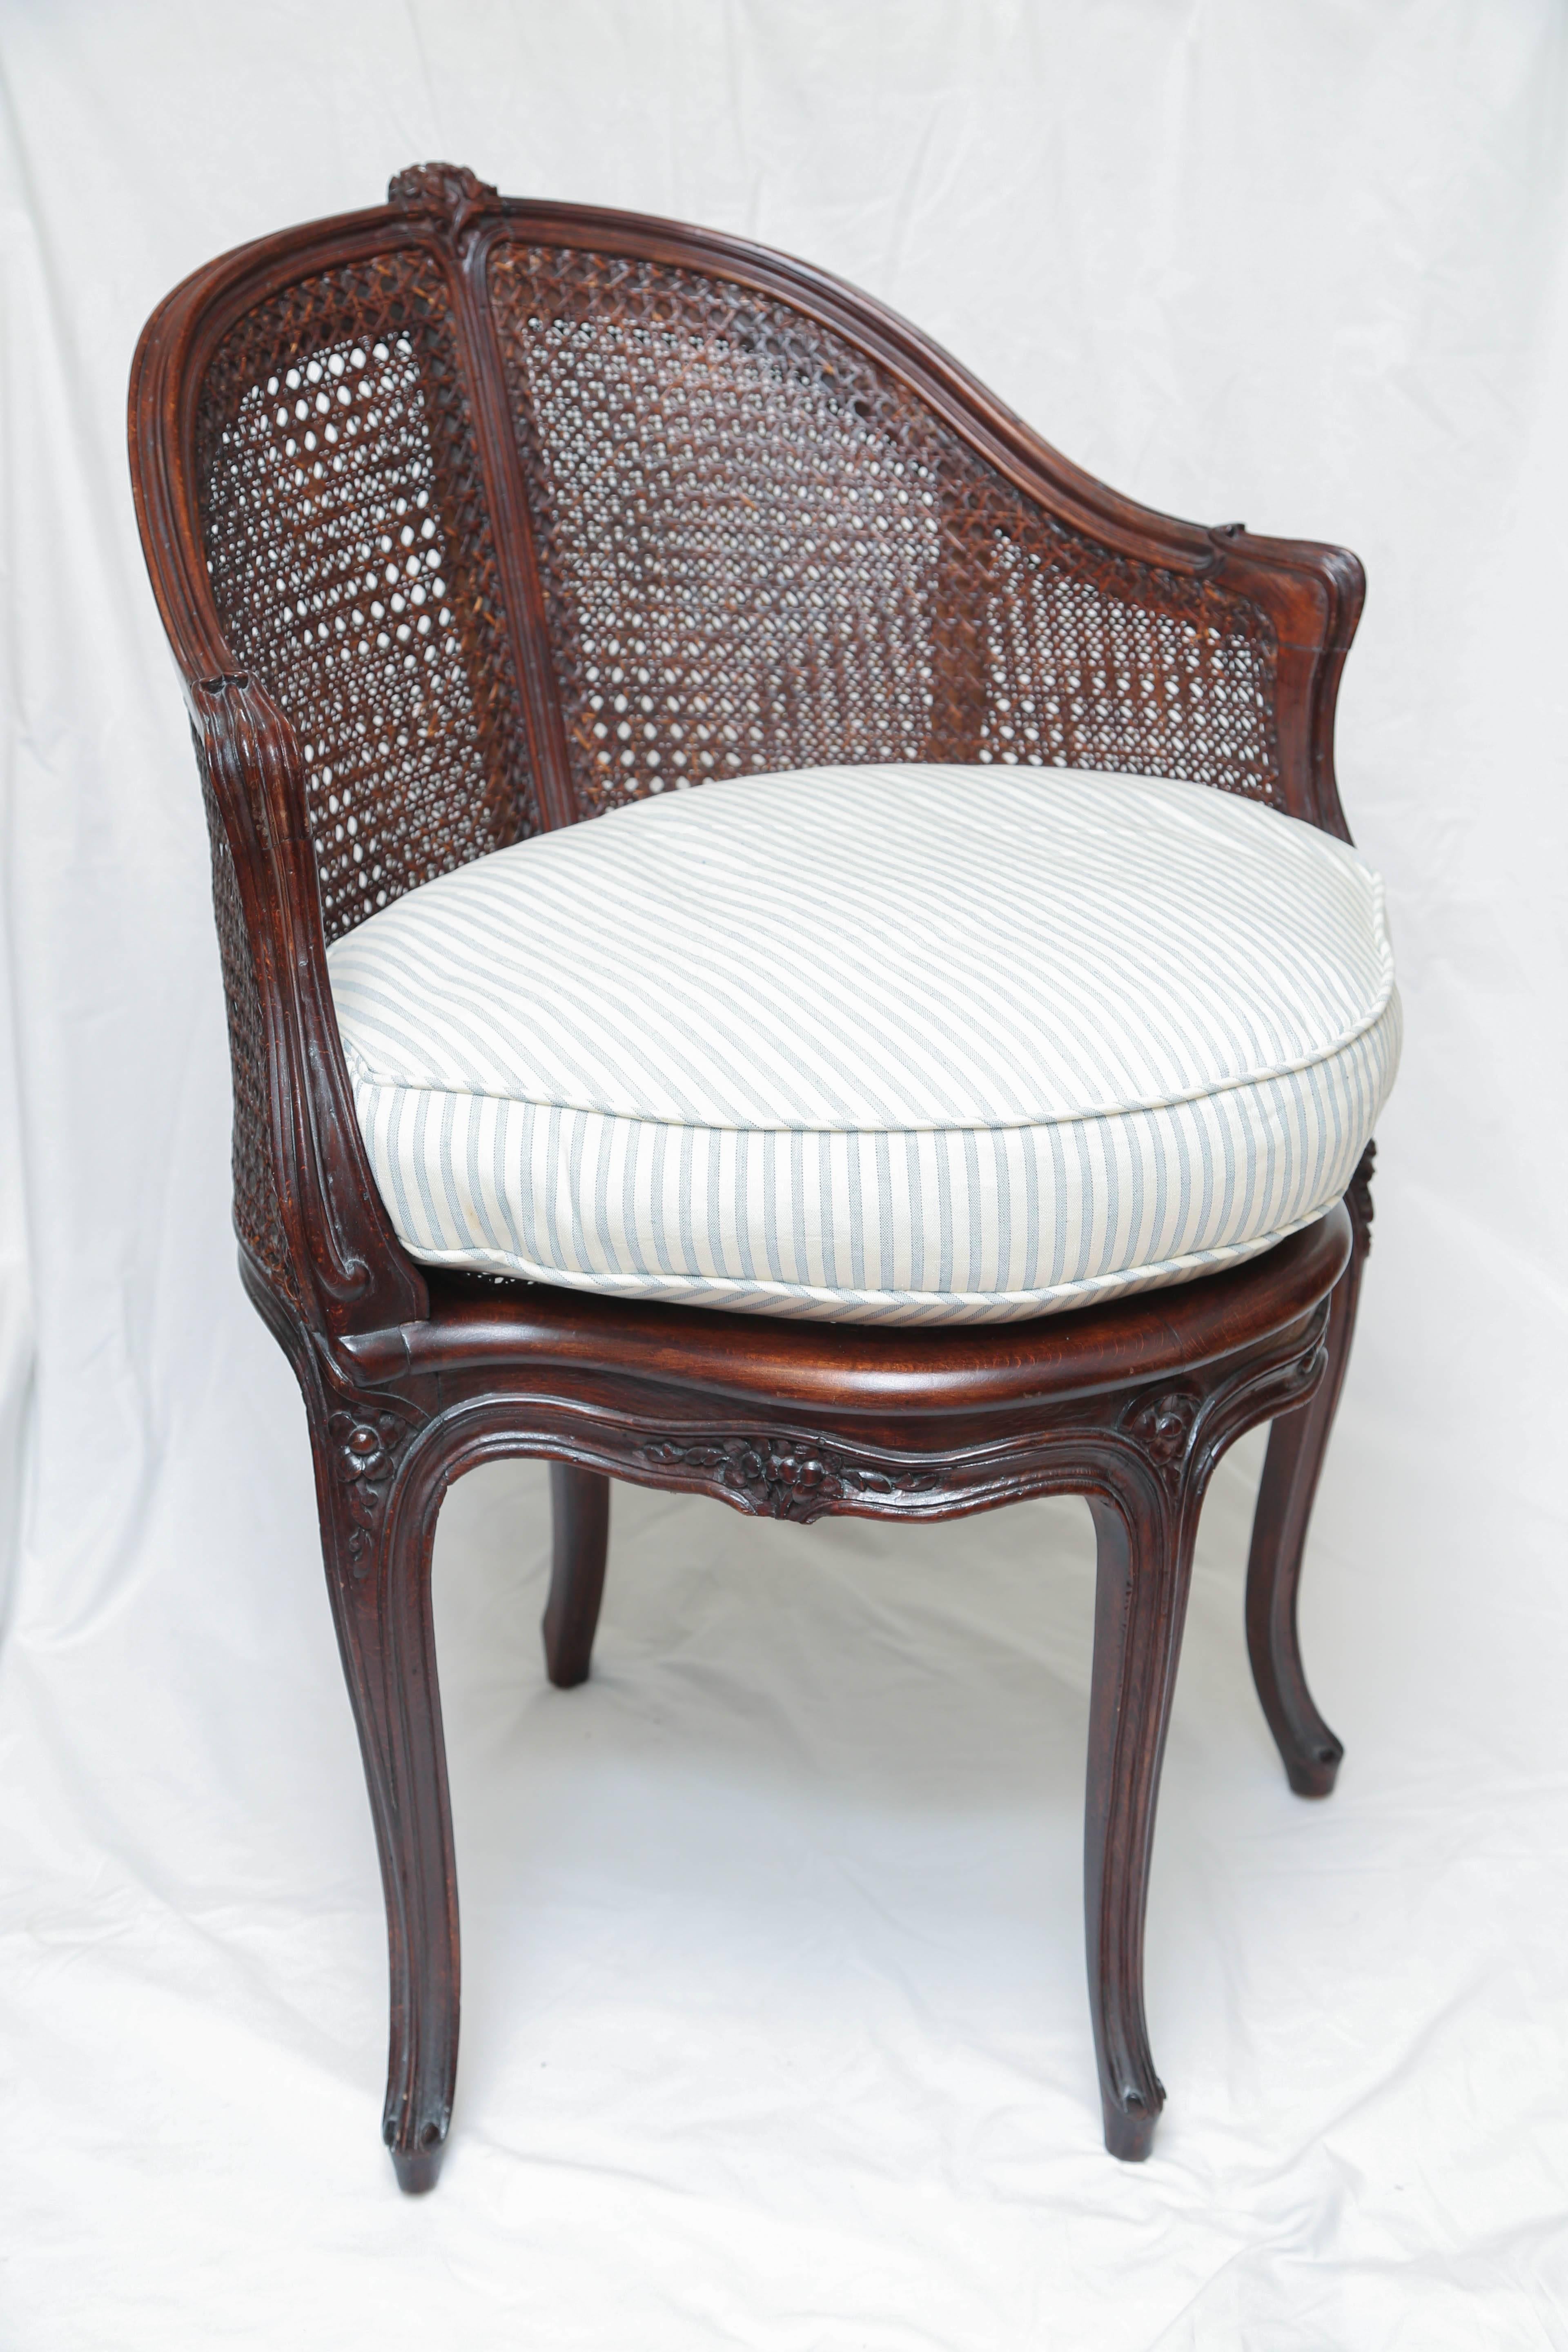 Single French caned armchair with down cushion and blue and white ticking fabric.